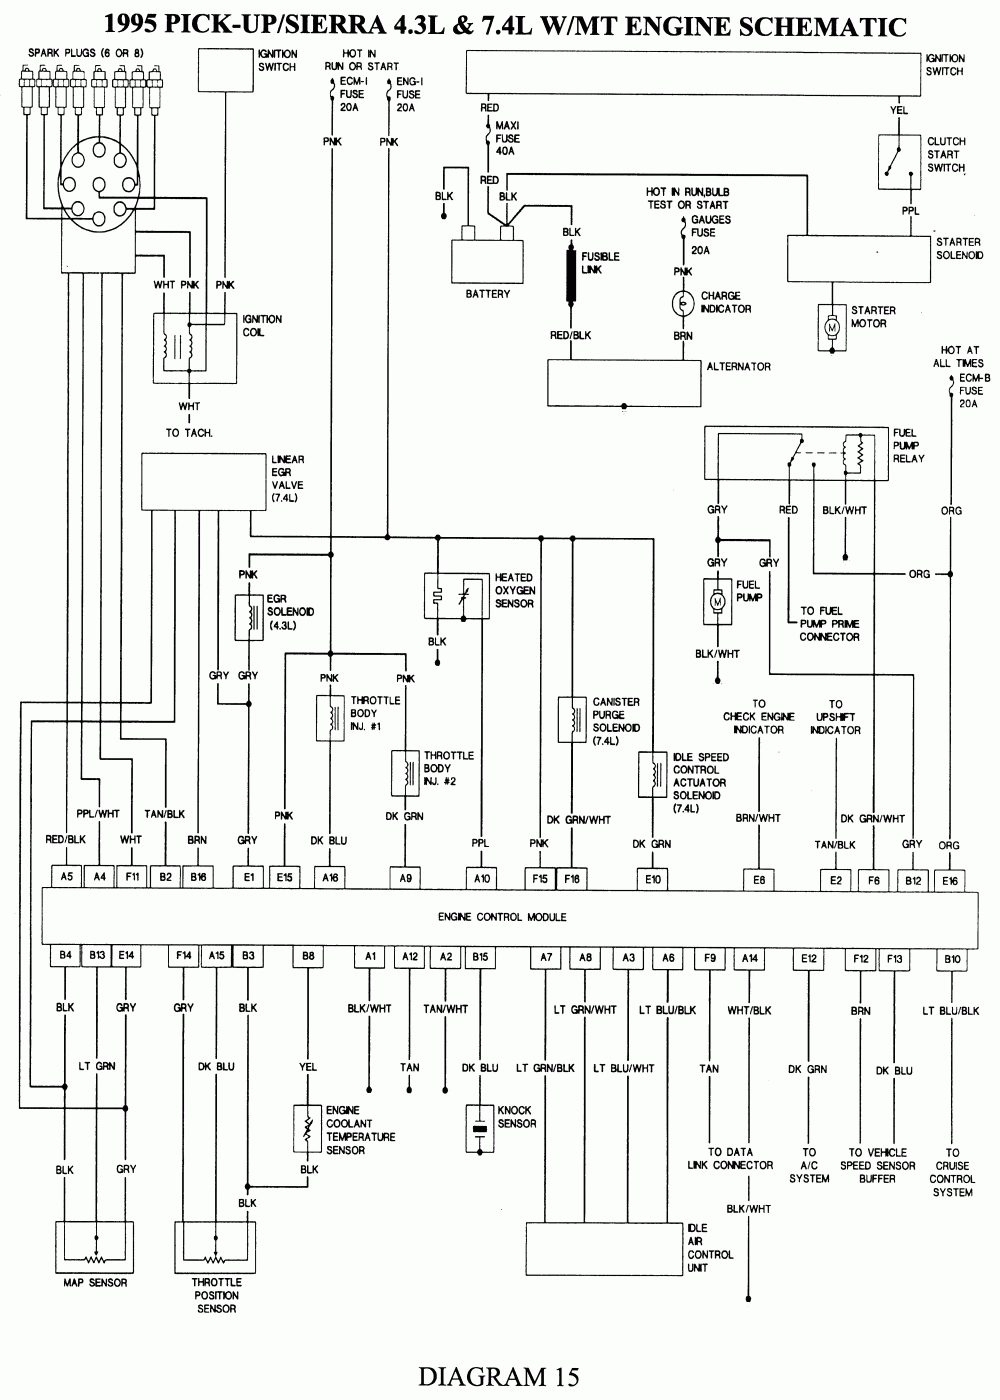 Wiring Diagram For Gm Fuel Pump